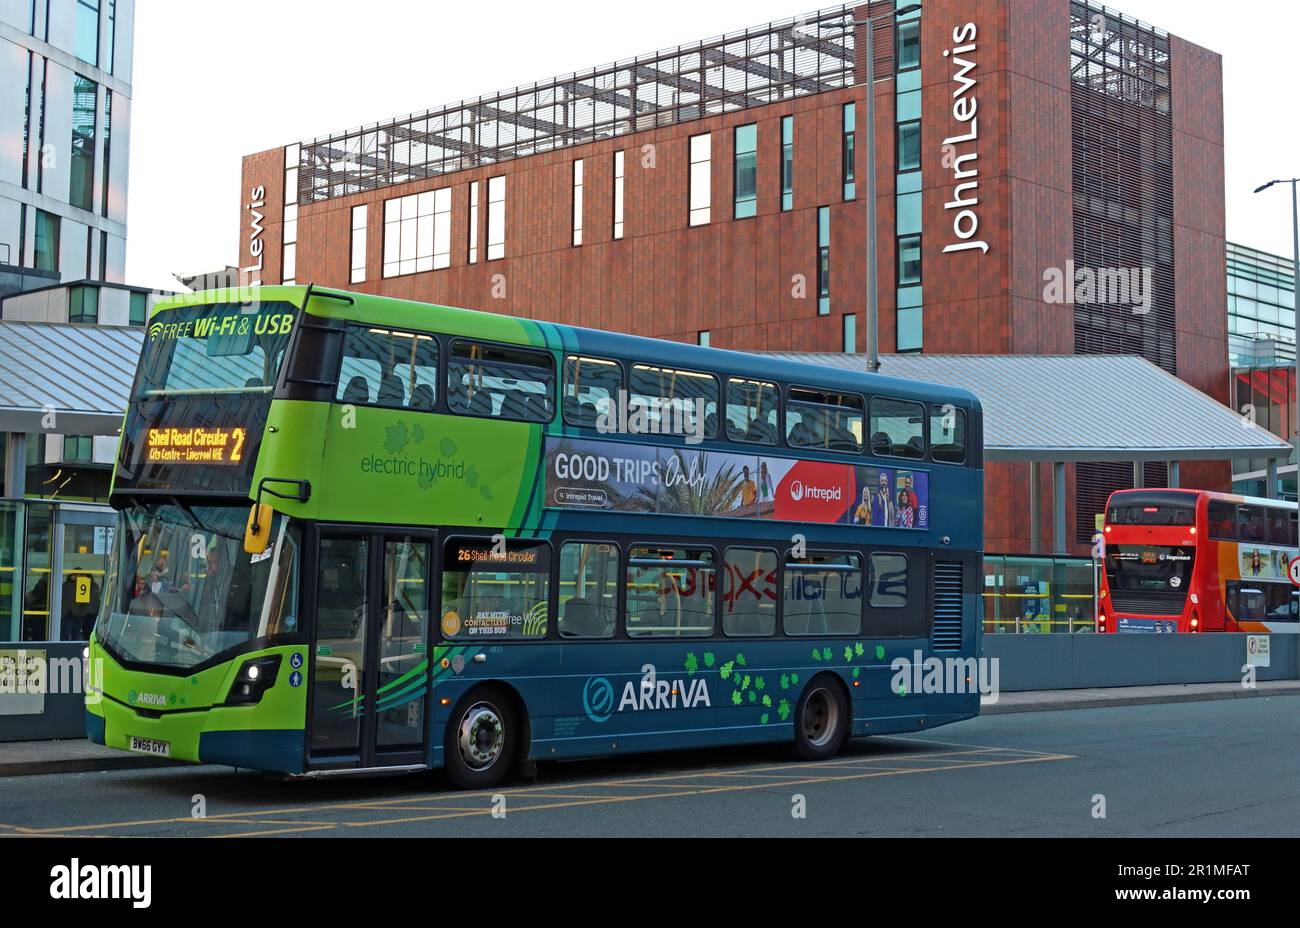 Cleaner, Electric Hybrid, Volvo Arriva bus, à Liverpool une gare routière, Paradise Street, Liverpool, Merseyside, Angleterre, ROYAUME-UNI, L1 3EU Banque D'Images